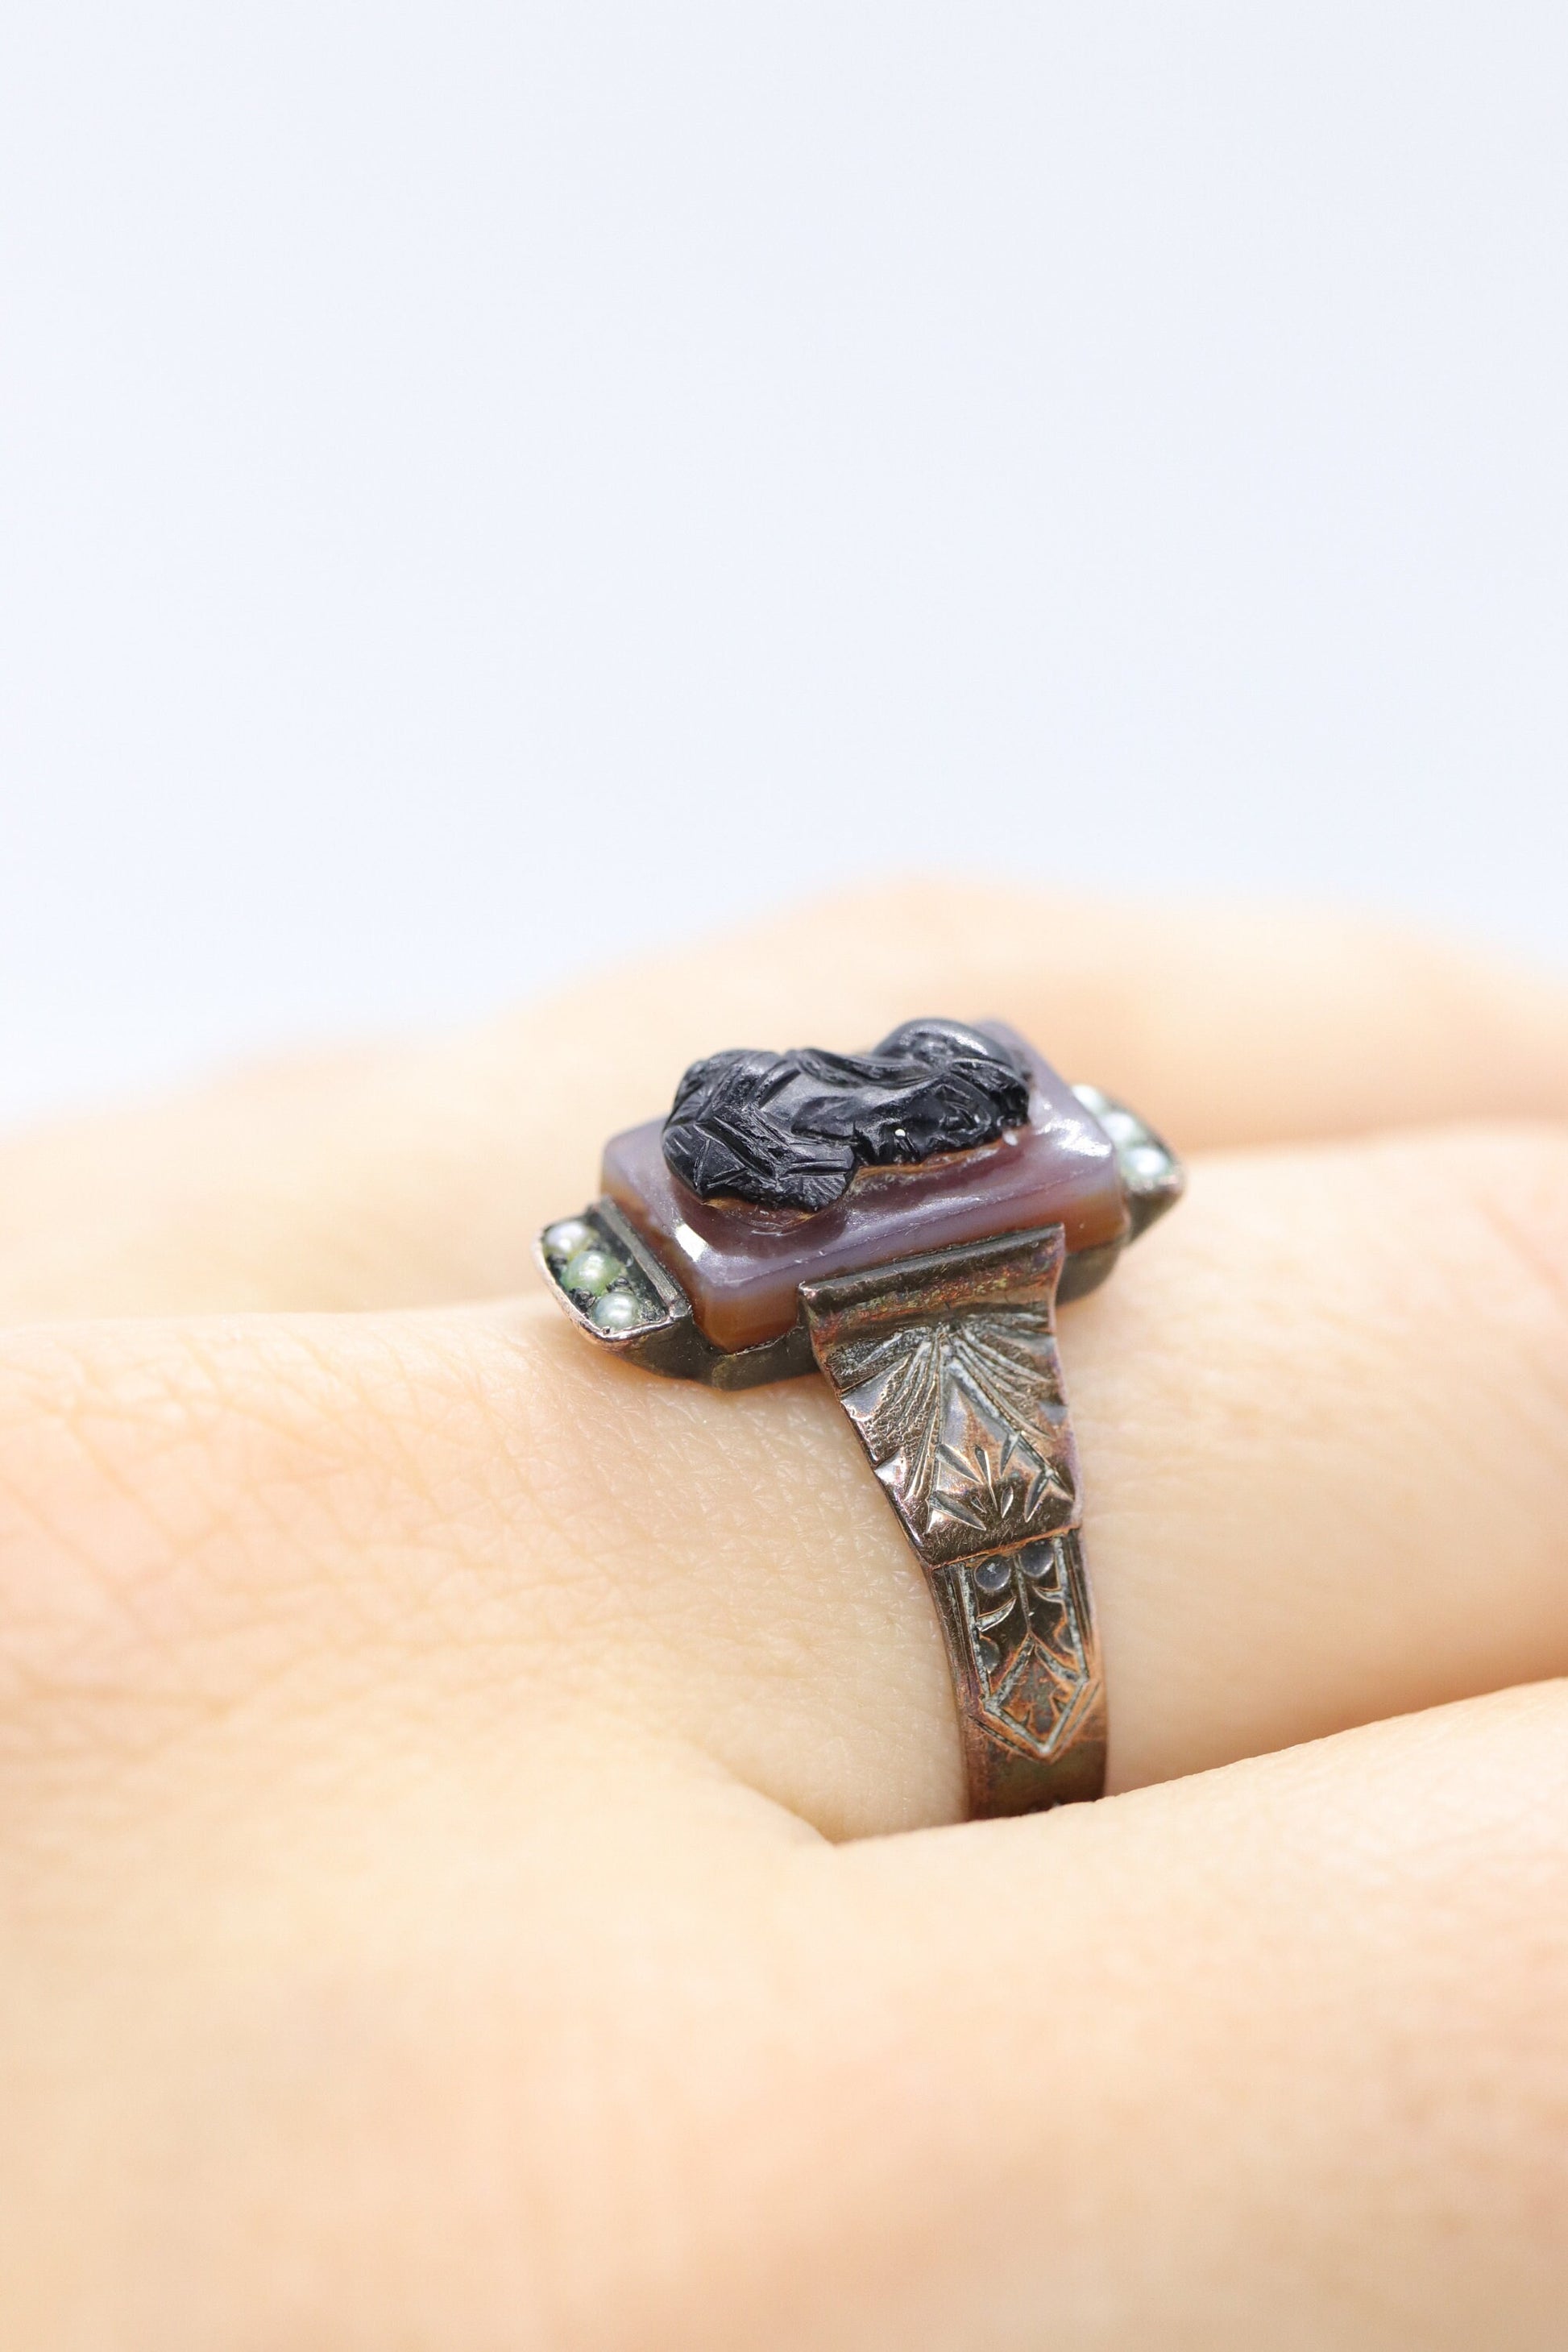 10k Antique Carved Roman soldier, Centurion Signet Ring. 10k gold Carved Victorian ring with pearl seeds